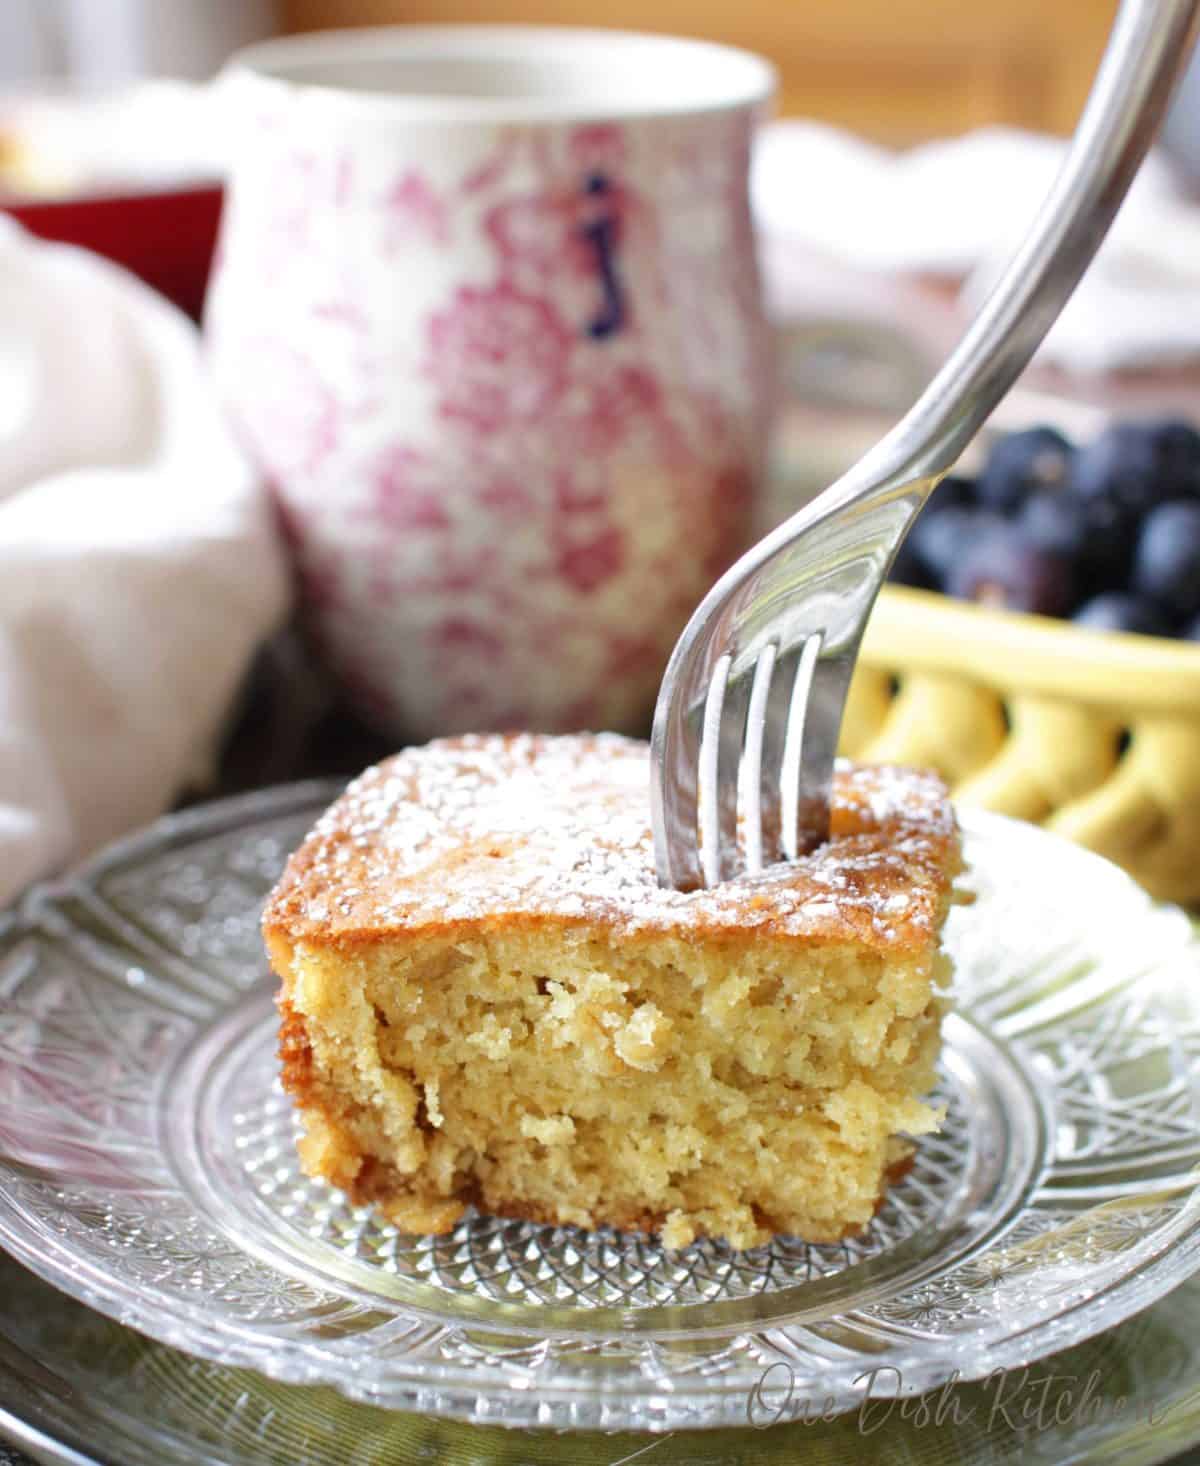 A fork piercing the top of a slice of orange oatmeal cake topped with powdered sugar next to a coffee mug and a small bowl of blueberries.